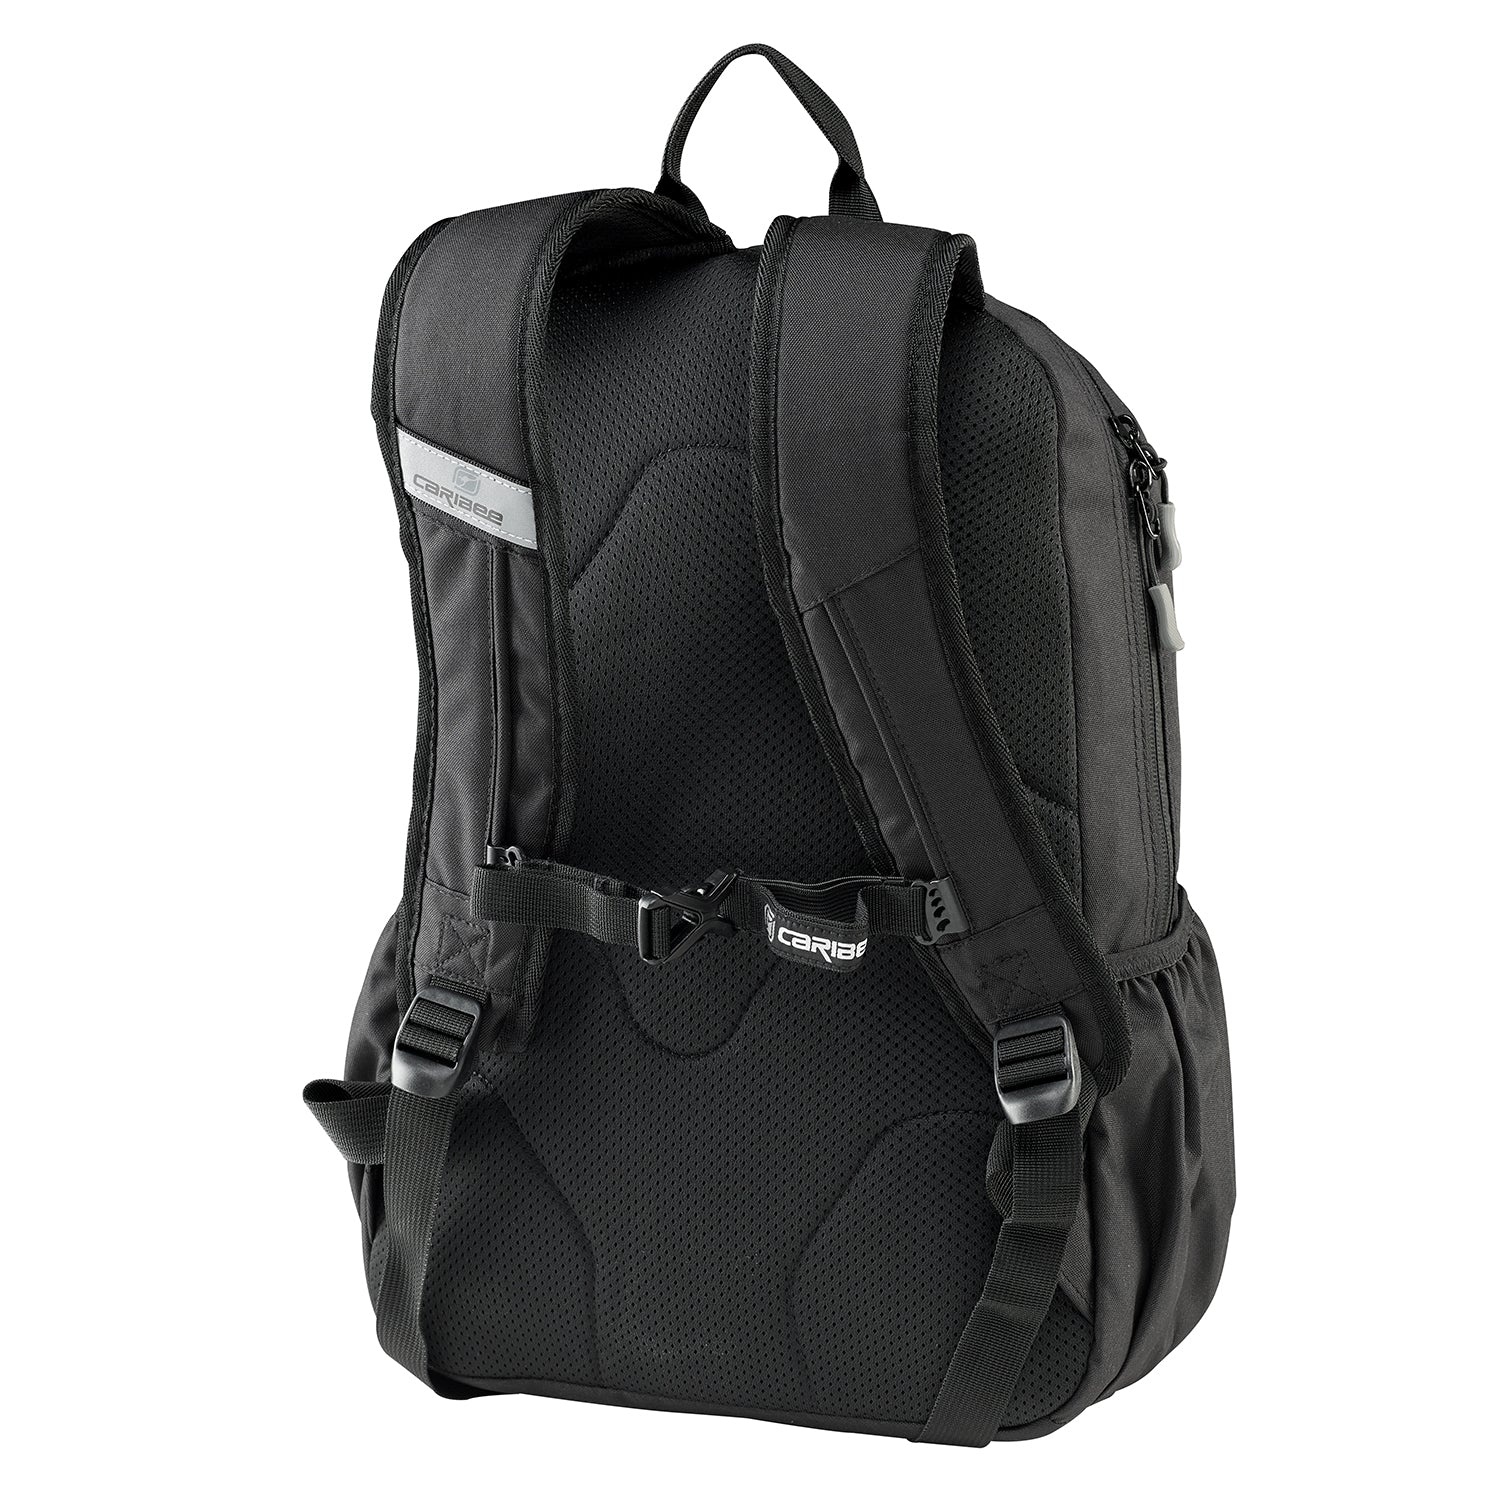 Caribee Nile 30L backpack - laptop and tablet ready